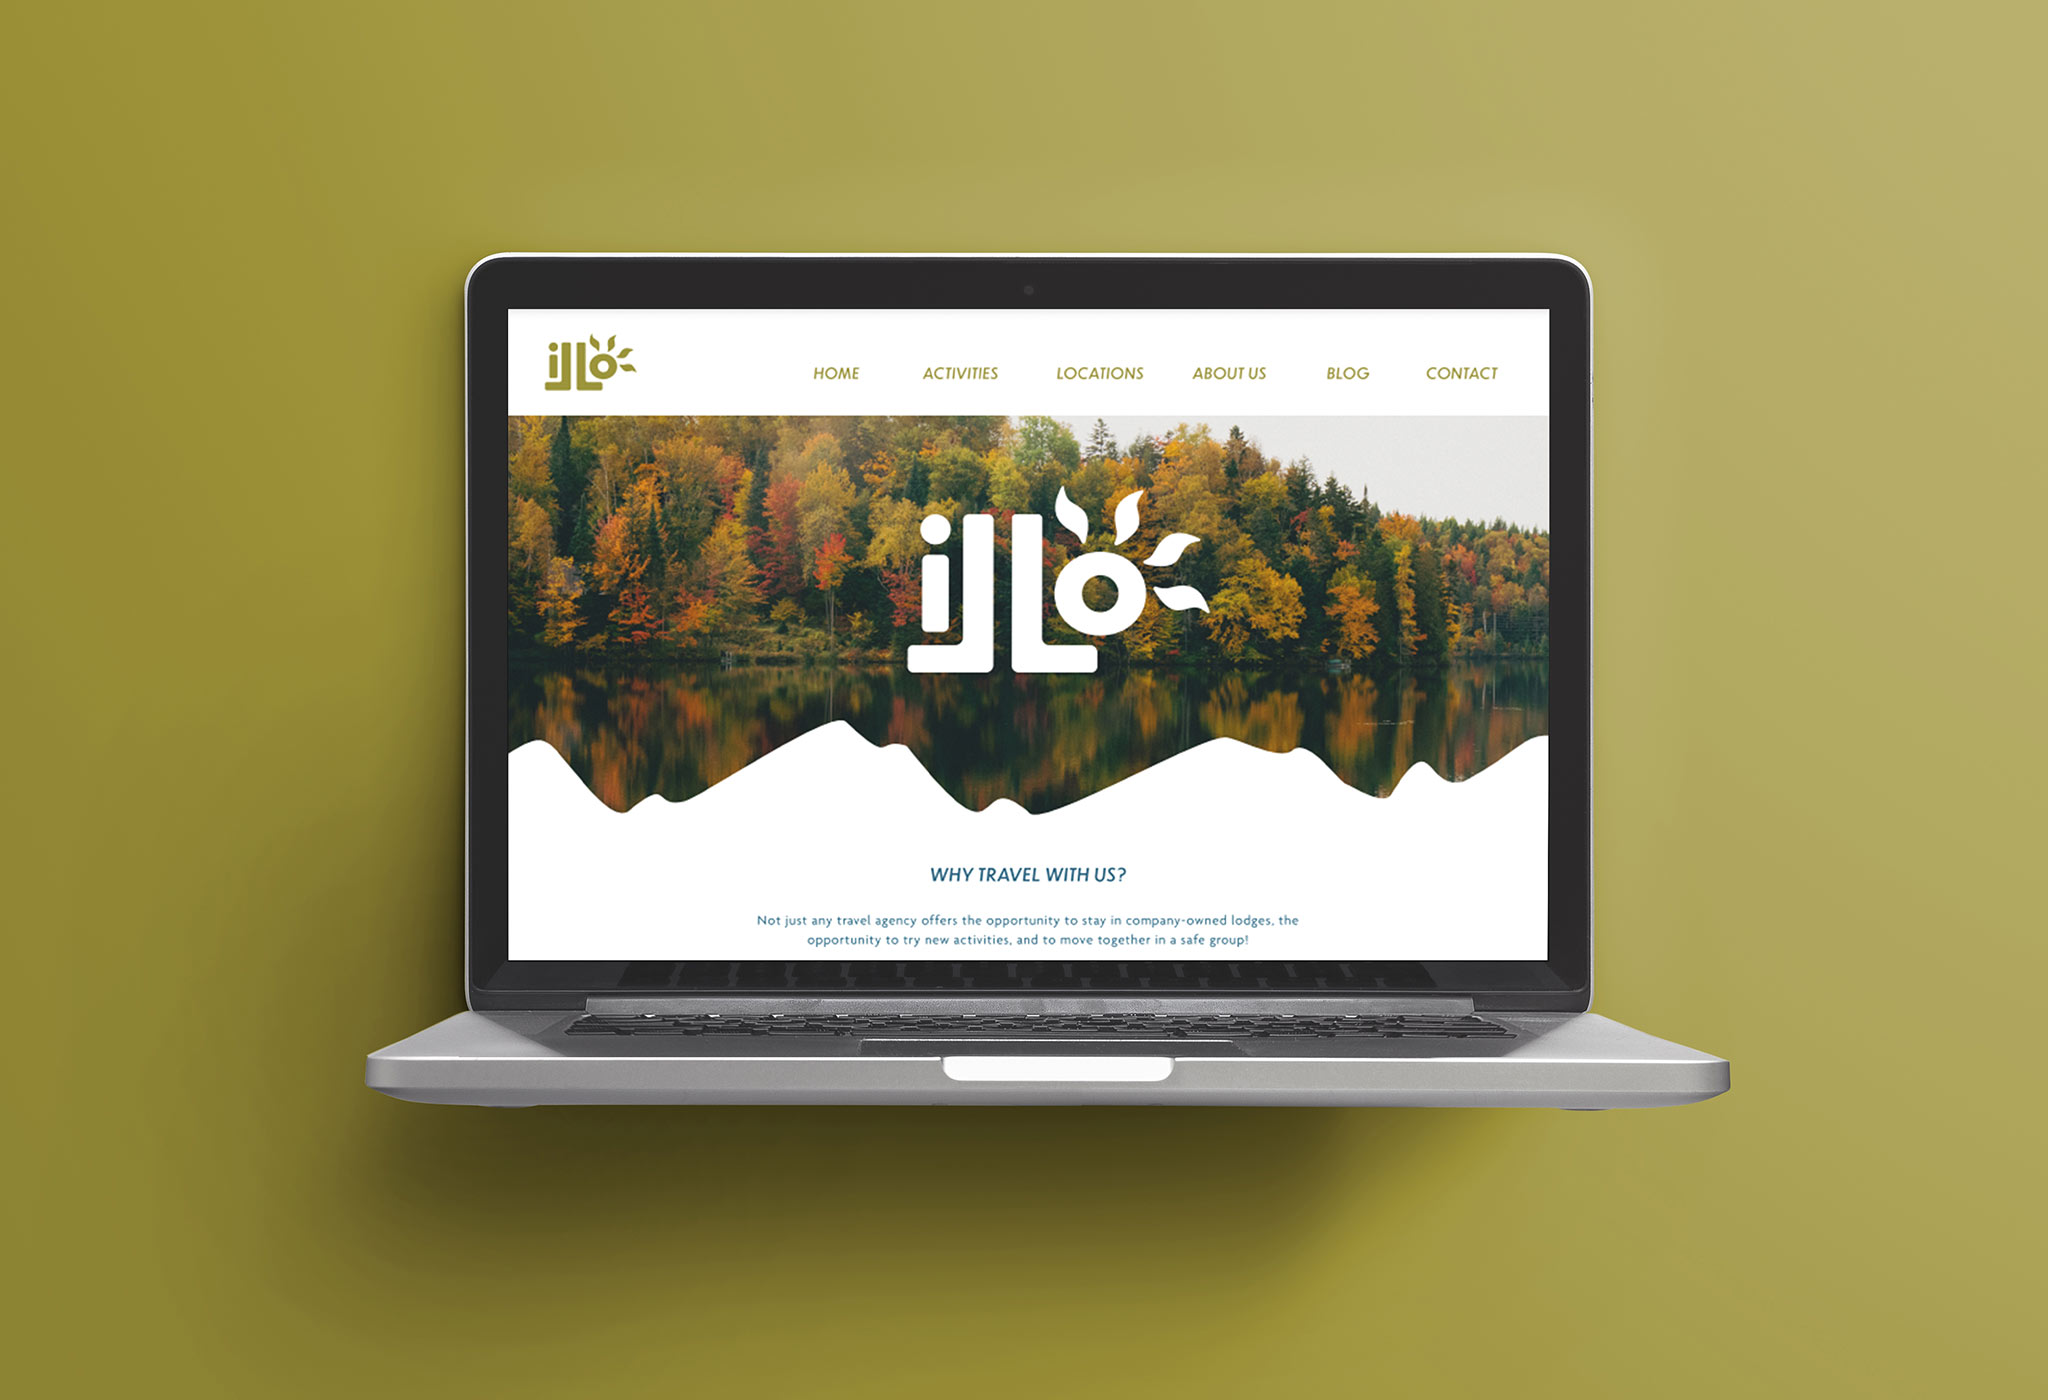 Laptop mockup displaying the home page of a hypothetical brand "Illo" which is a travel agency.